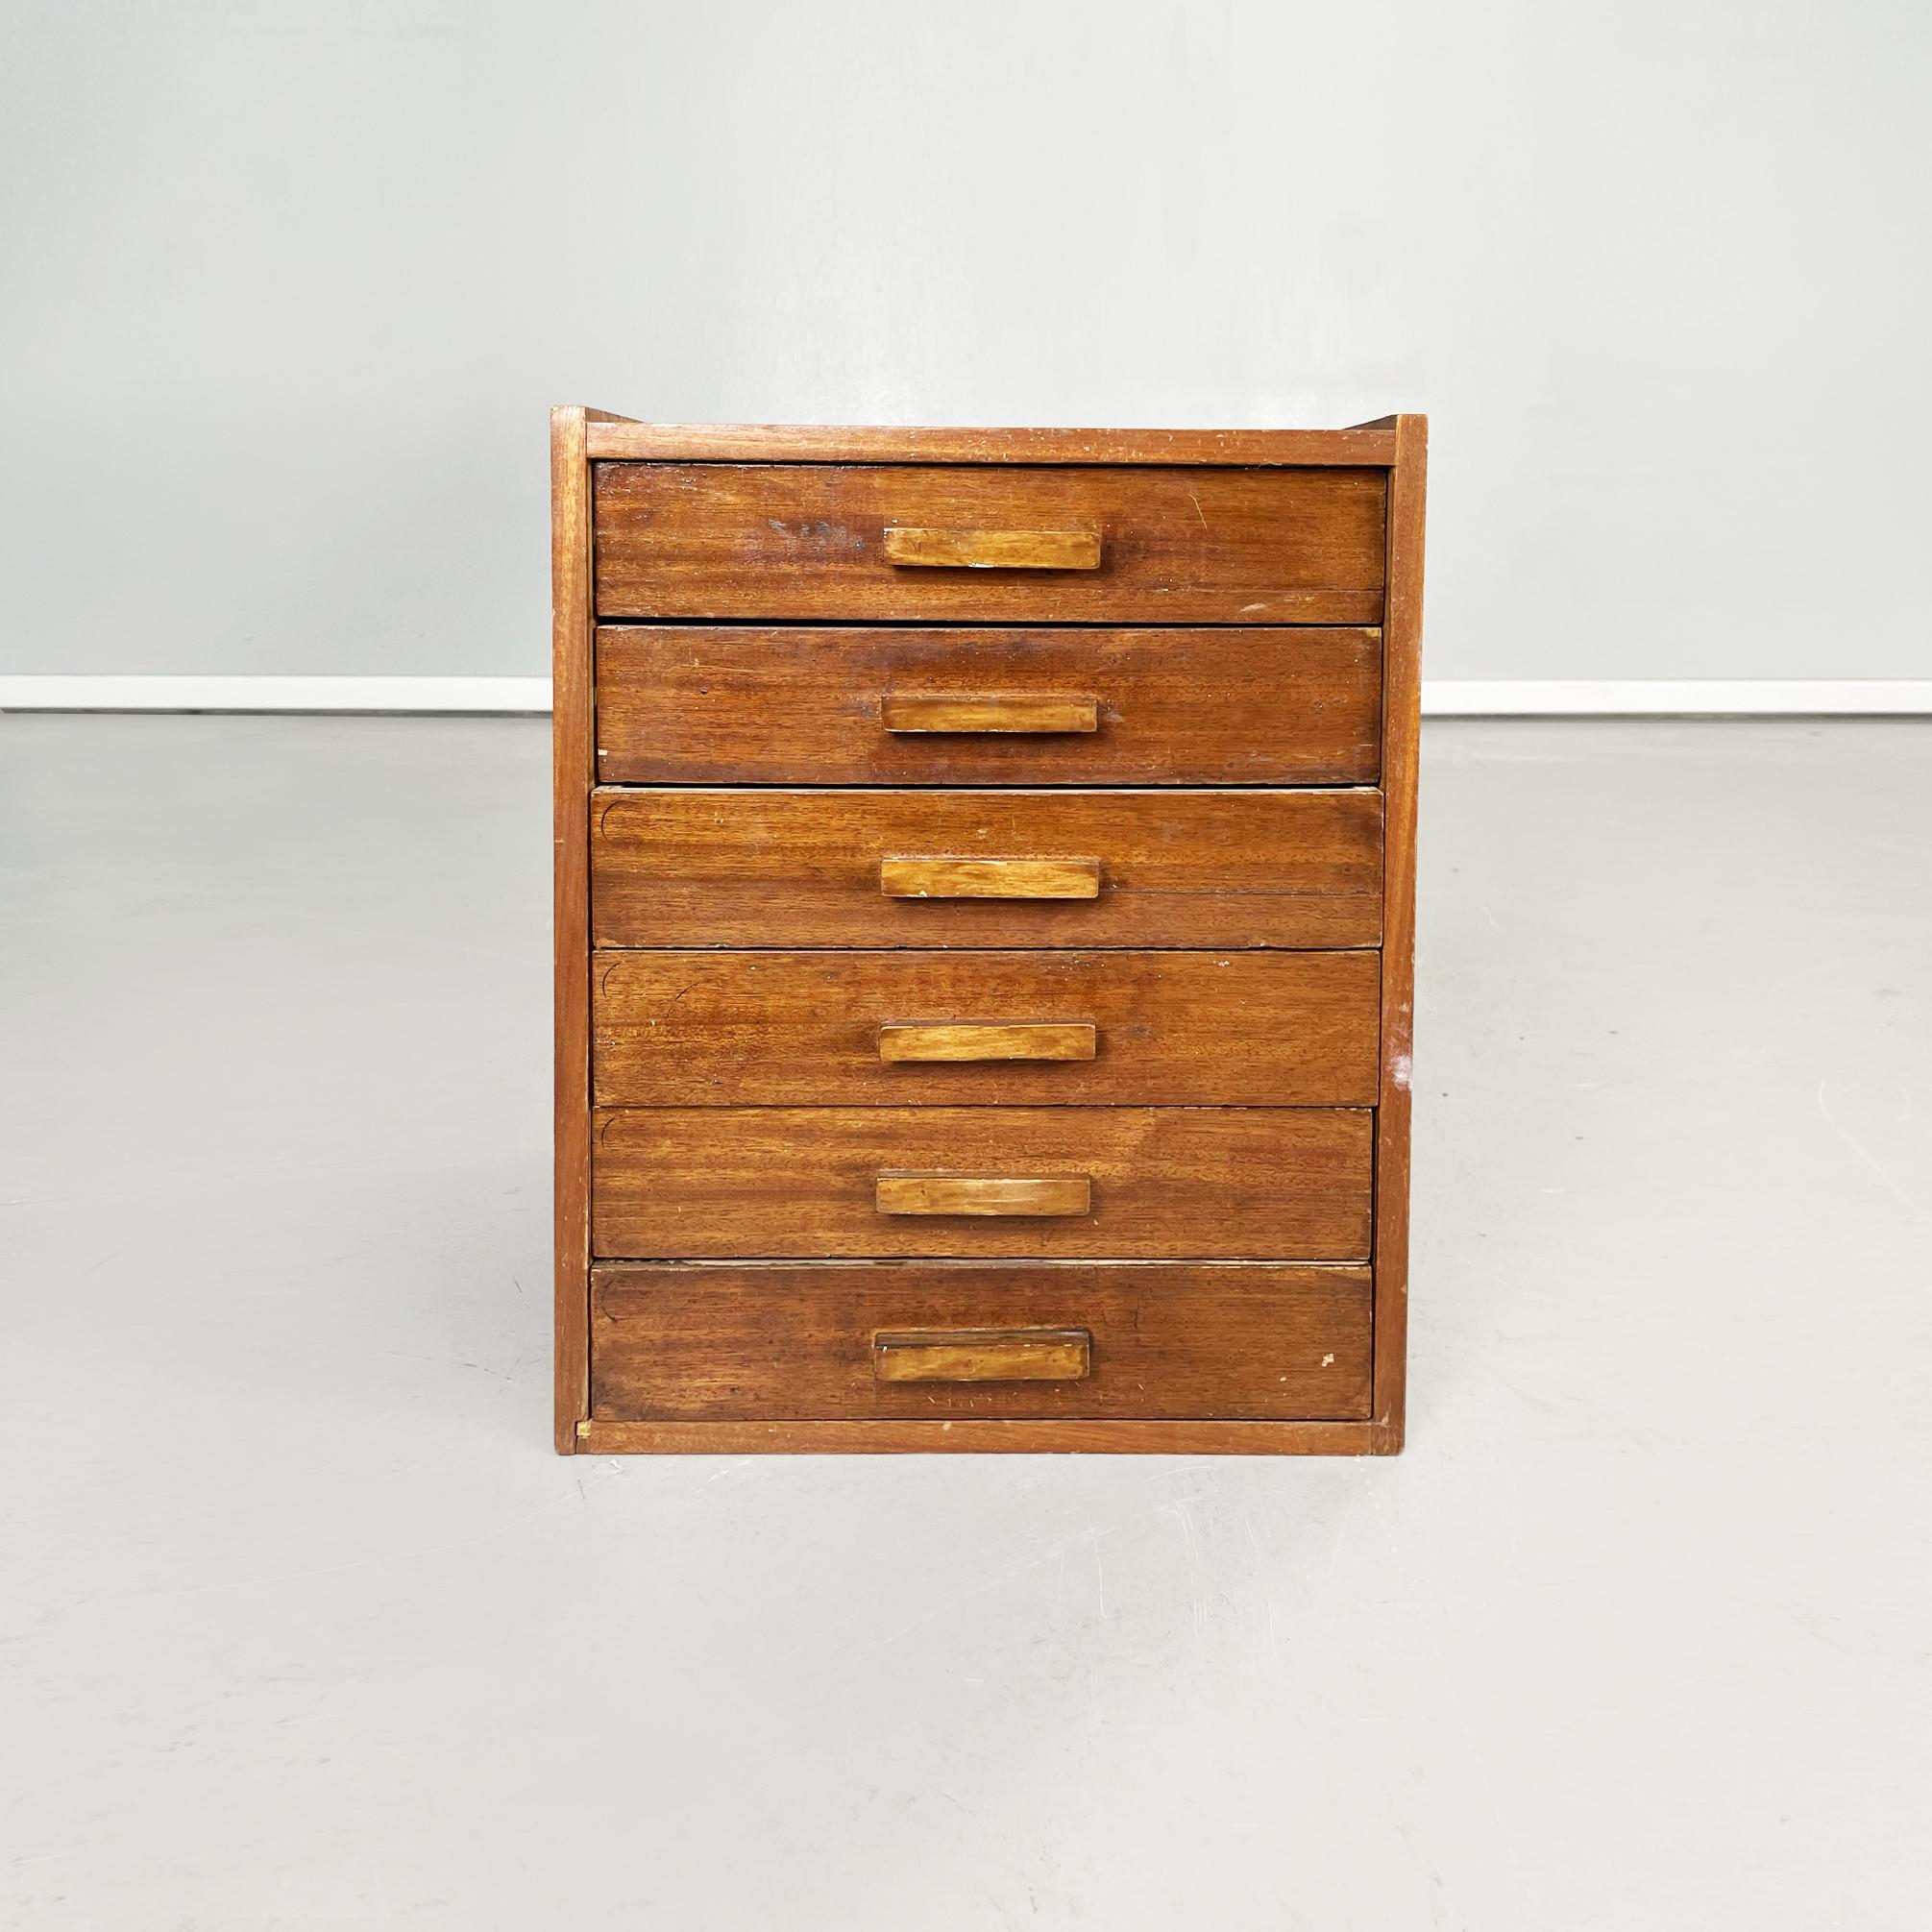 Italian mid-century Wooden chest of drawers for tailoring by Filofort, 1940s
Chest of drawers with rectangular wooden base. On the front there are drawers. On the sides and on the back there are original logos and advertising stickers. On the back